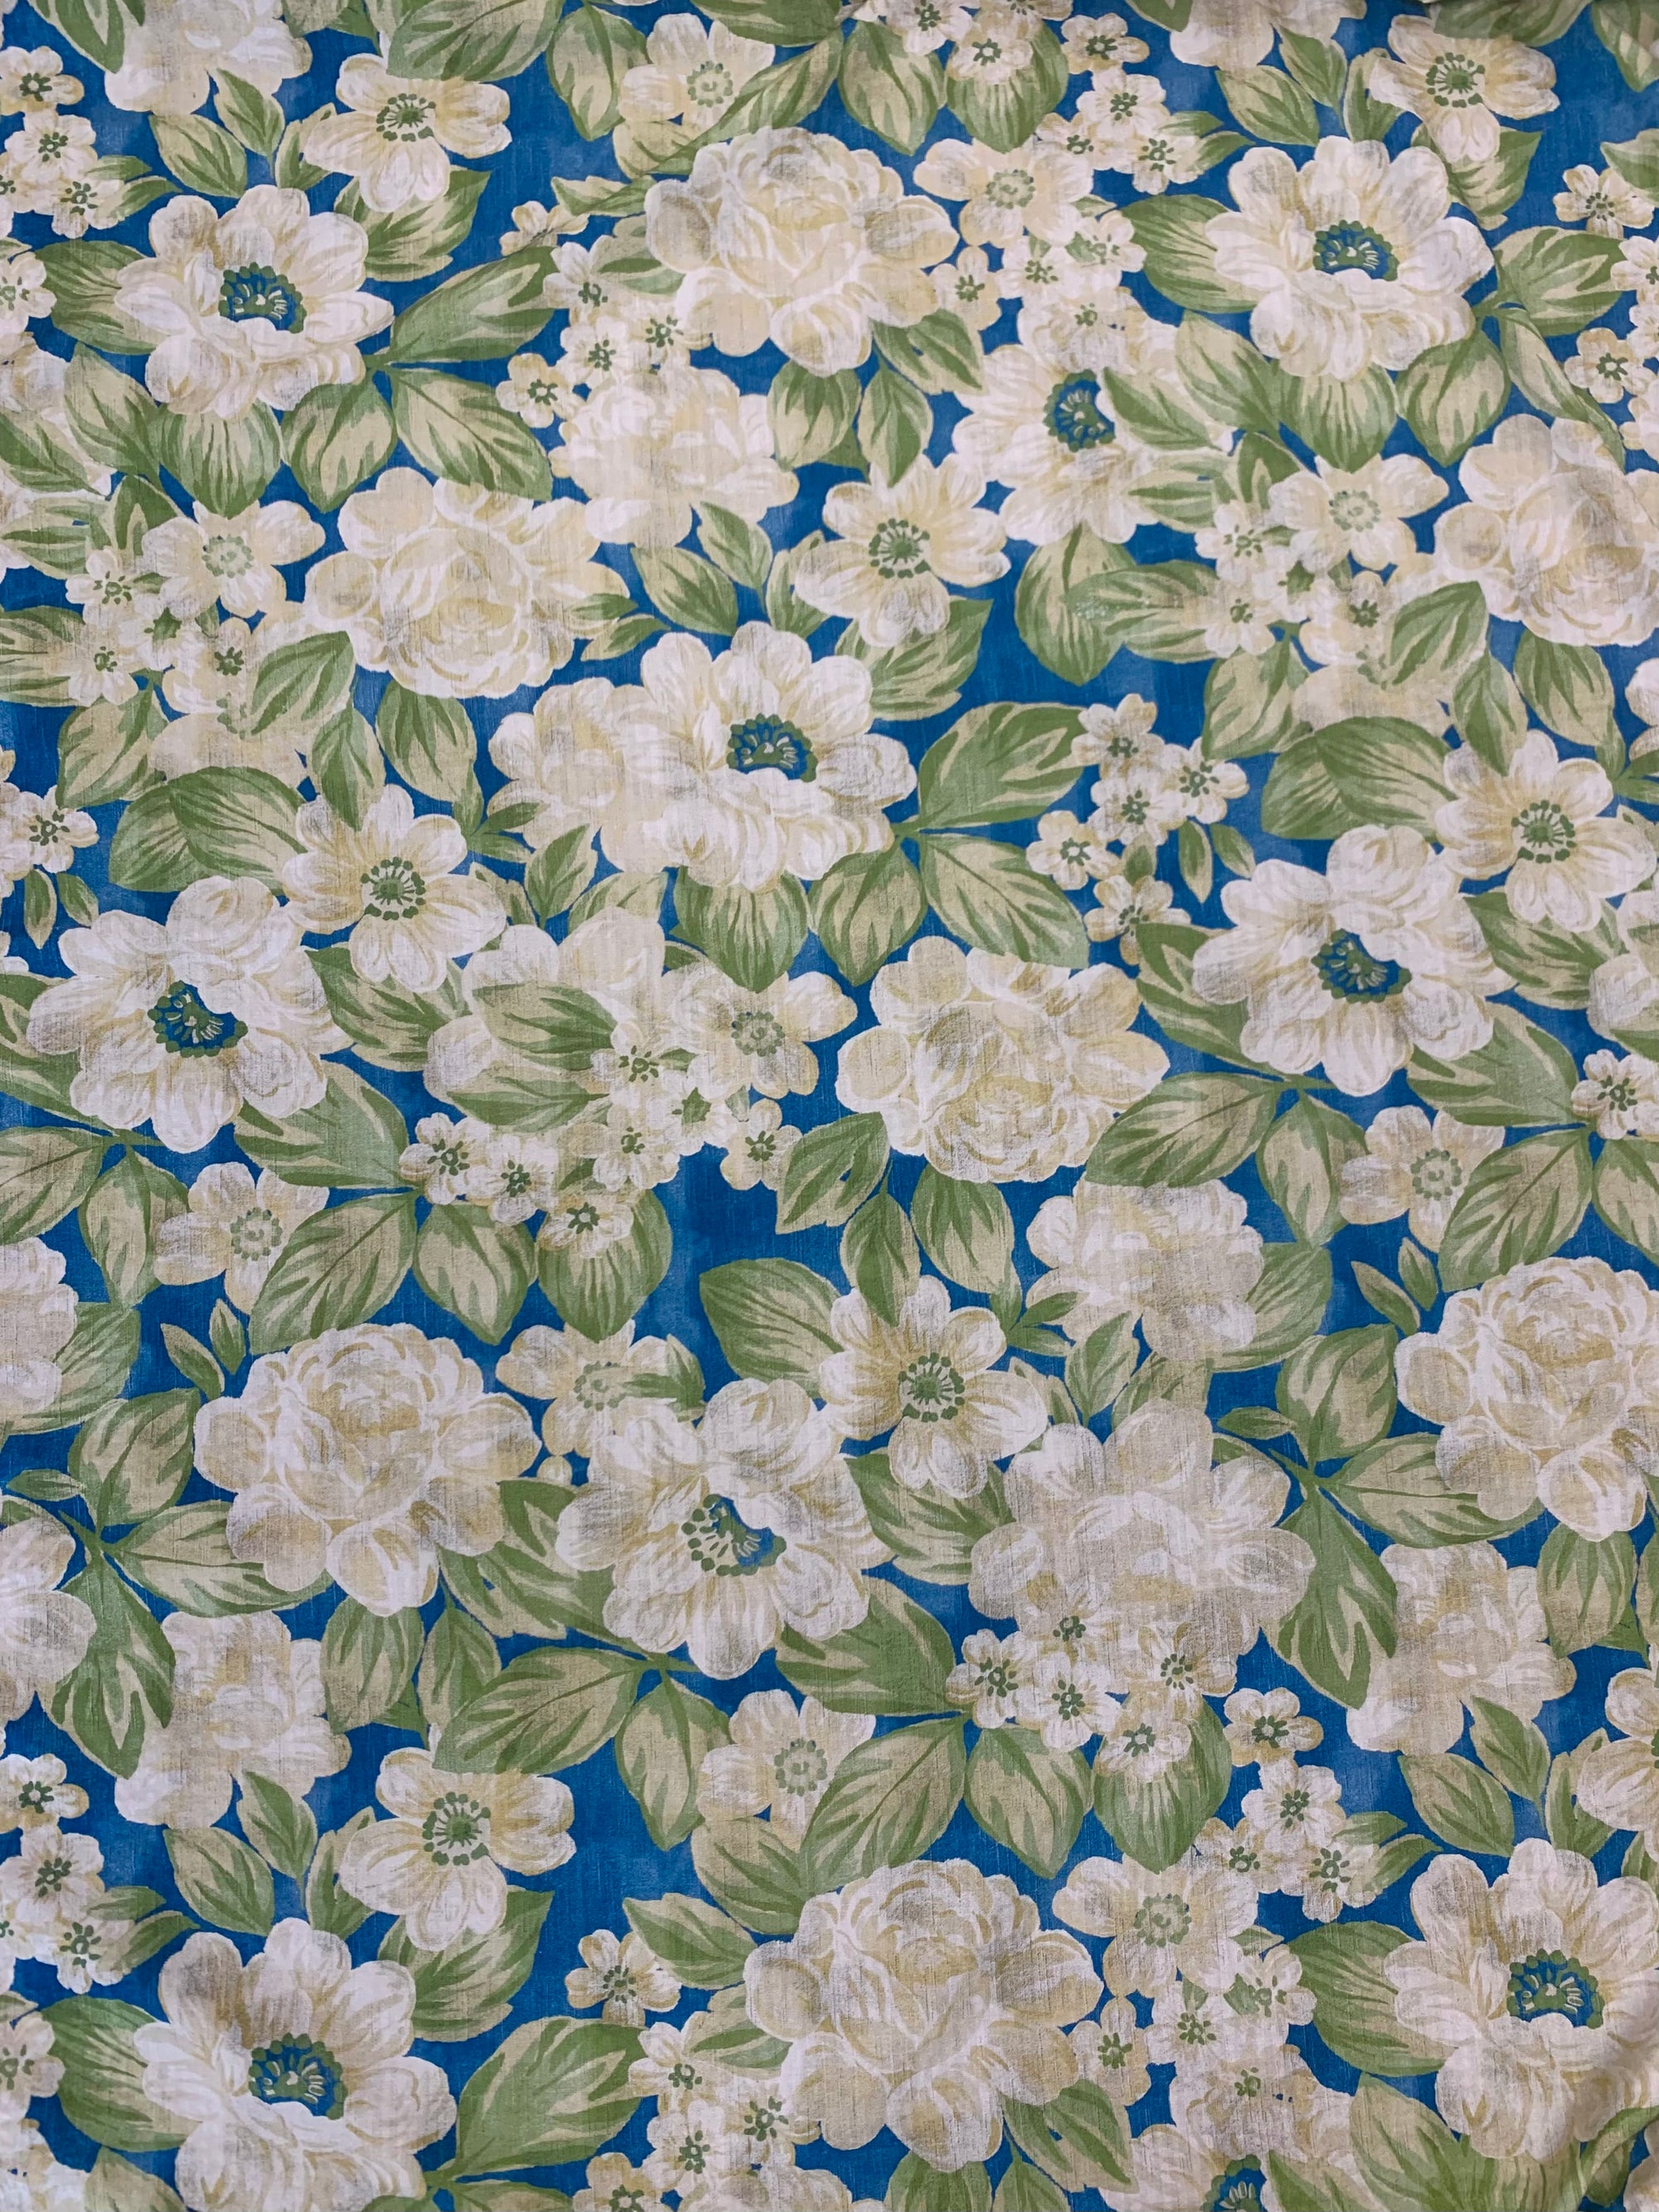 flat cotton seersucker in a royal blue with a beige and green rose floral print